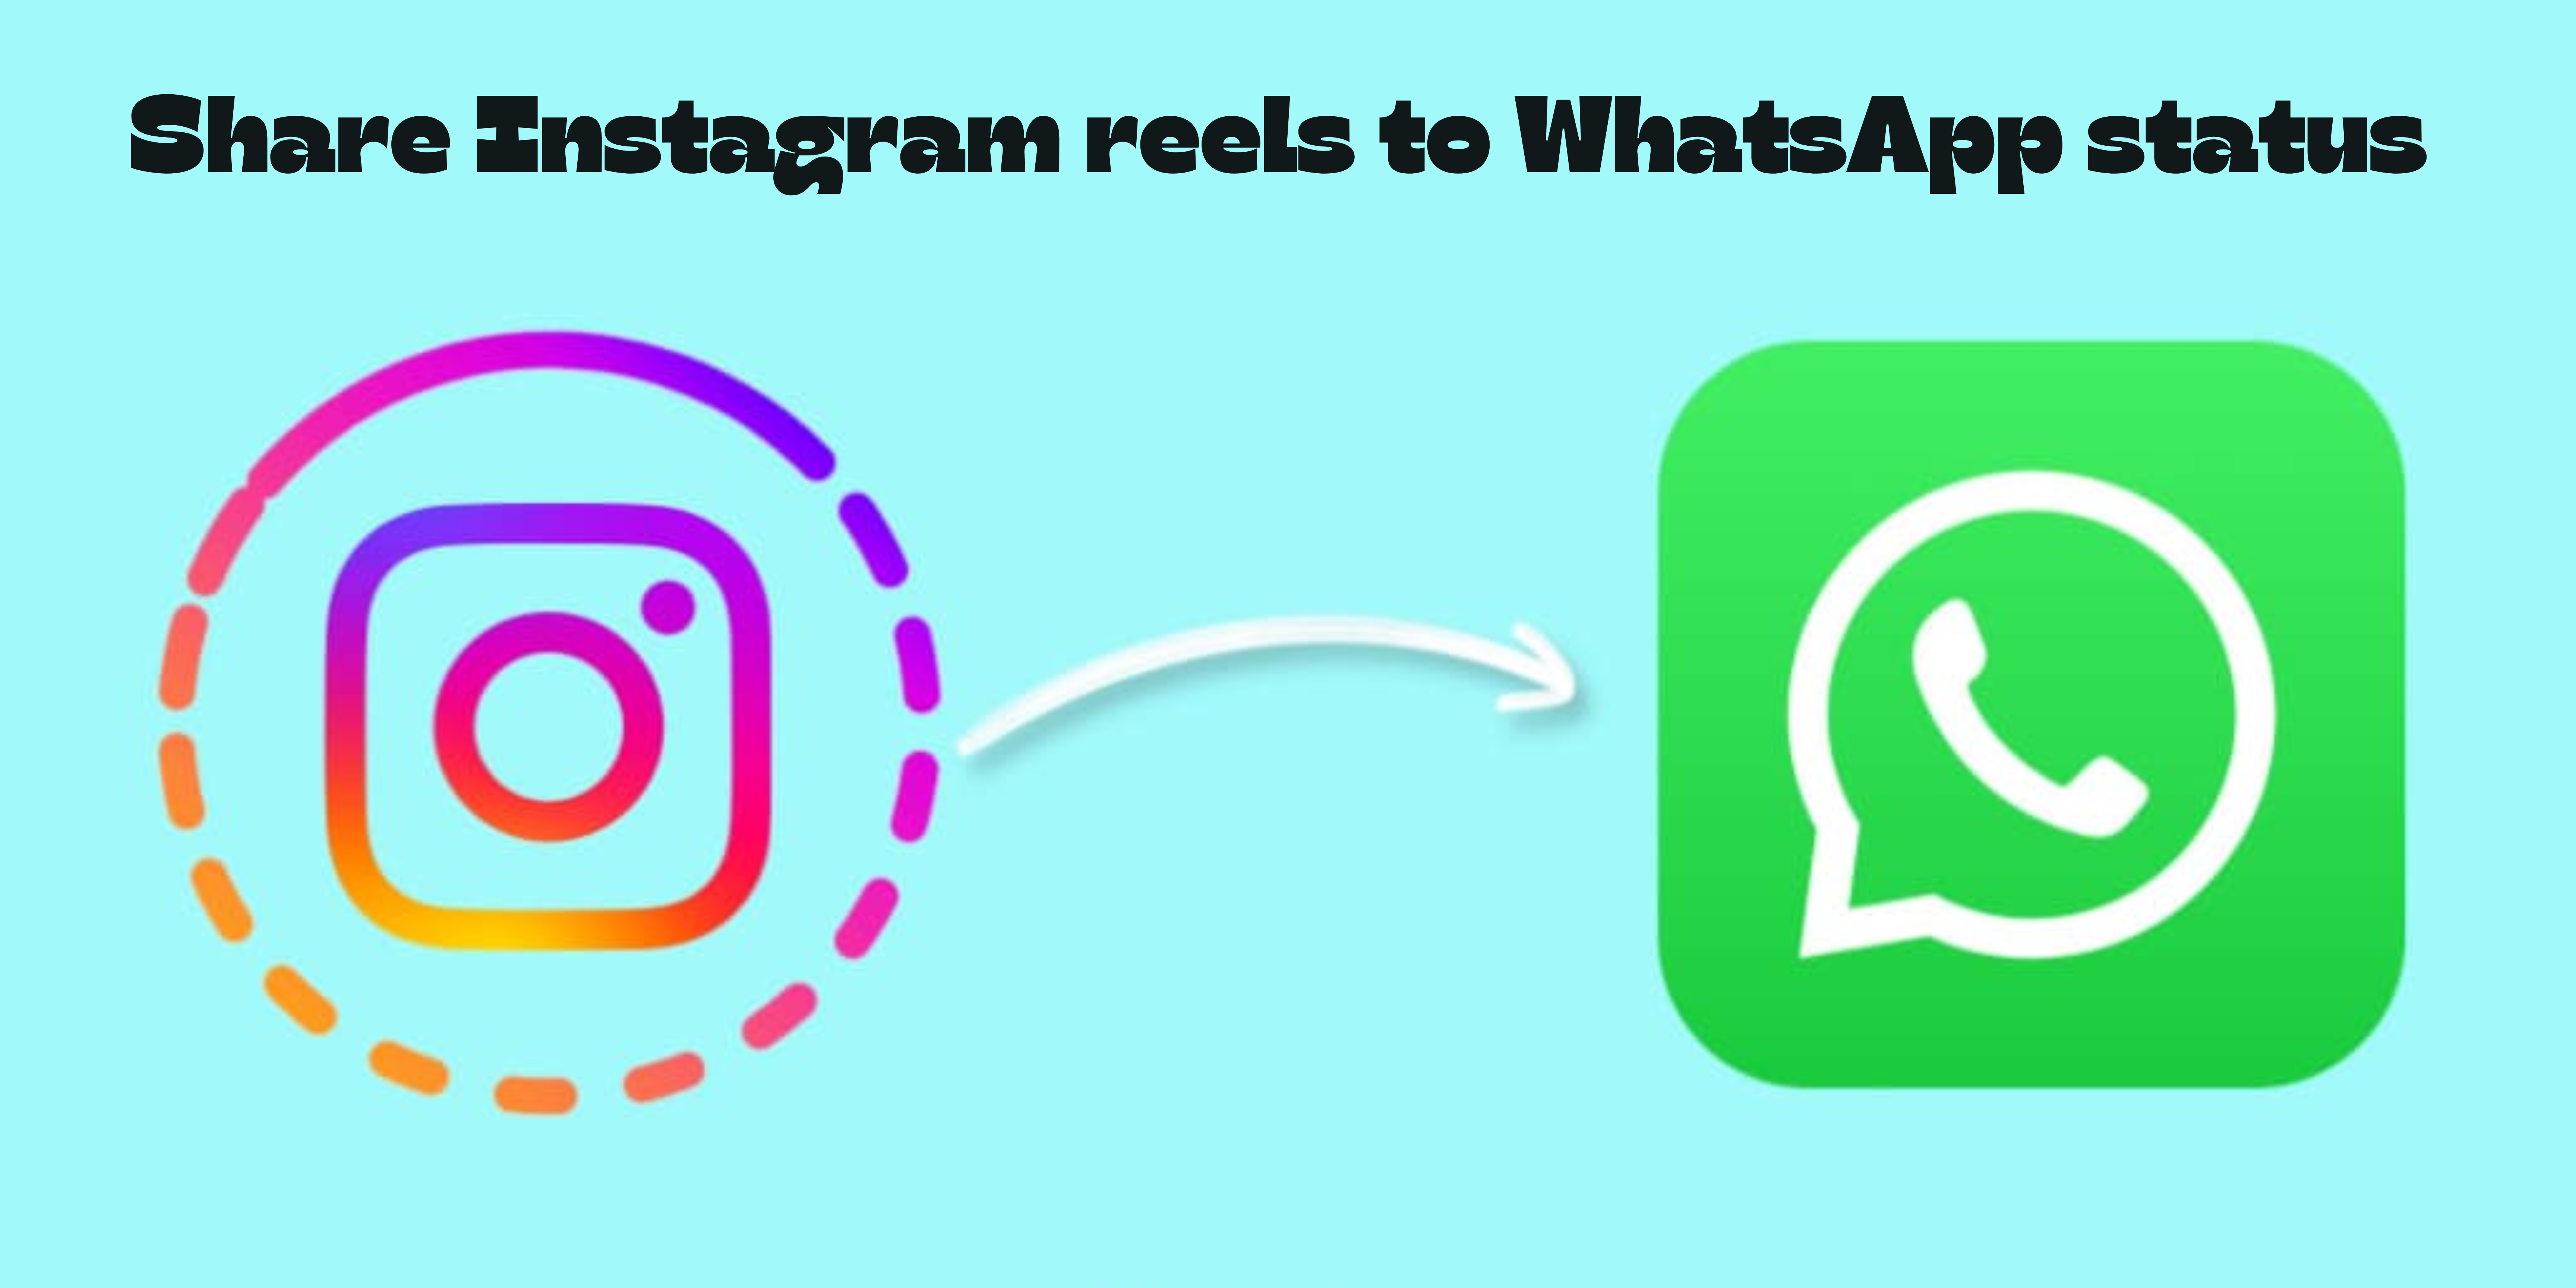 How to share Instagram reels to WhatsApp status